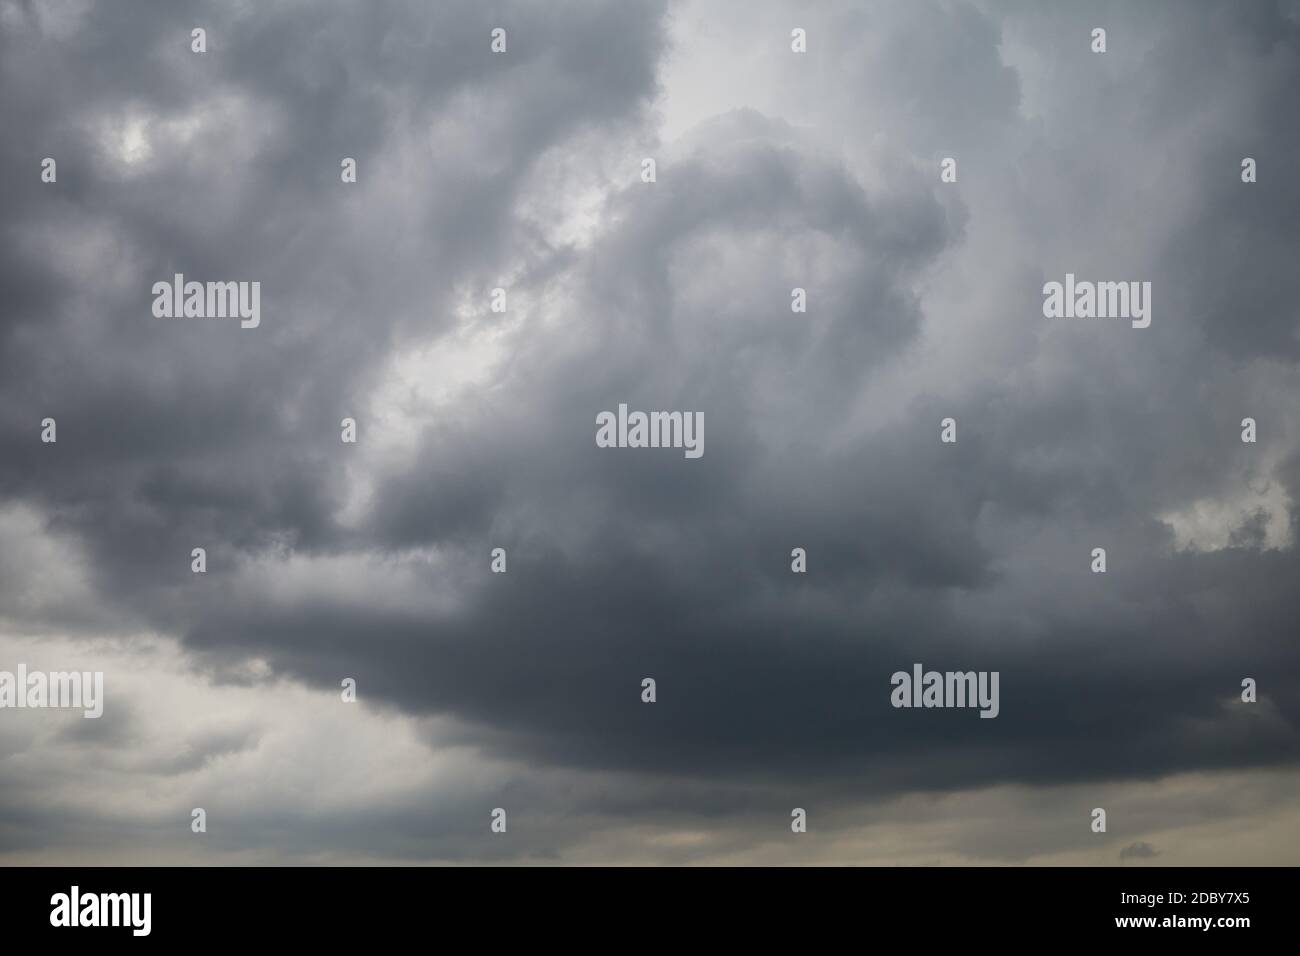 The gray sky is covered with heavy, leaden clouds. Stock Photo